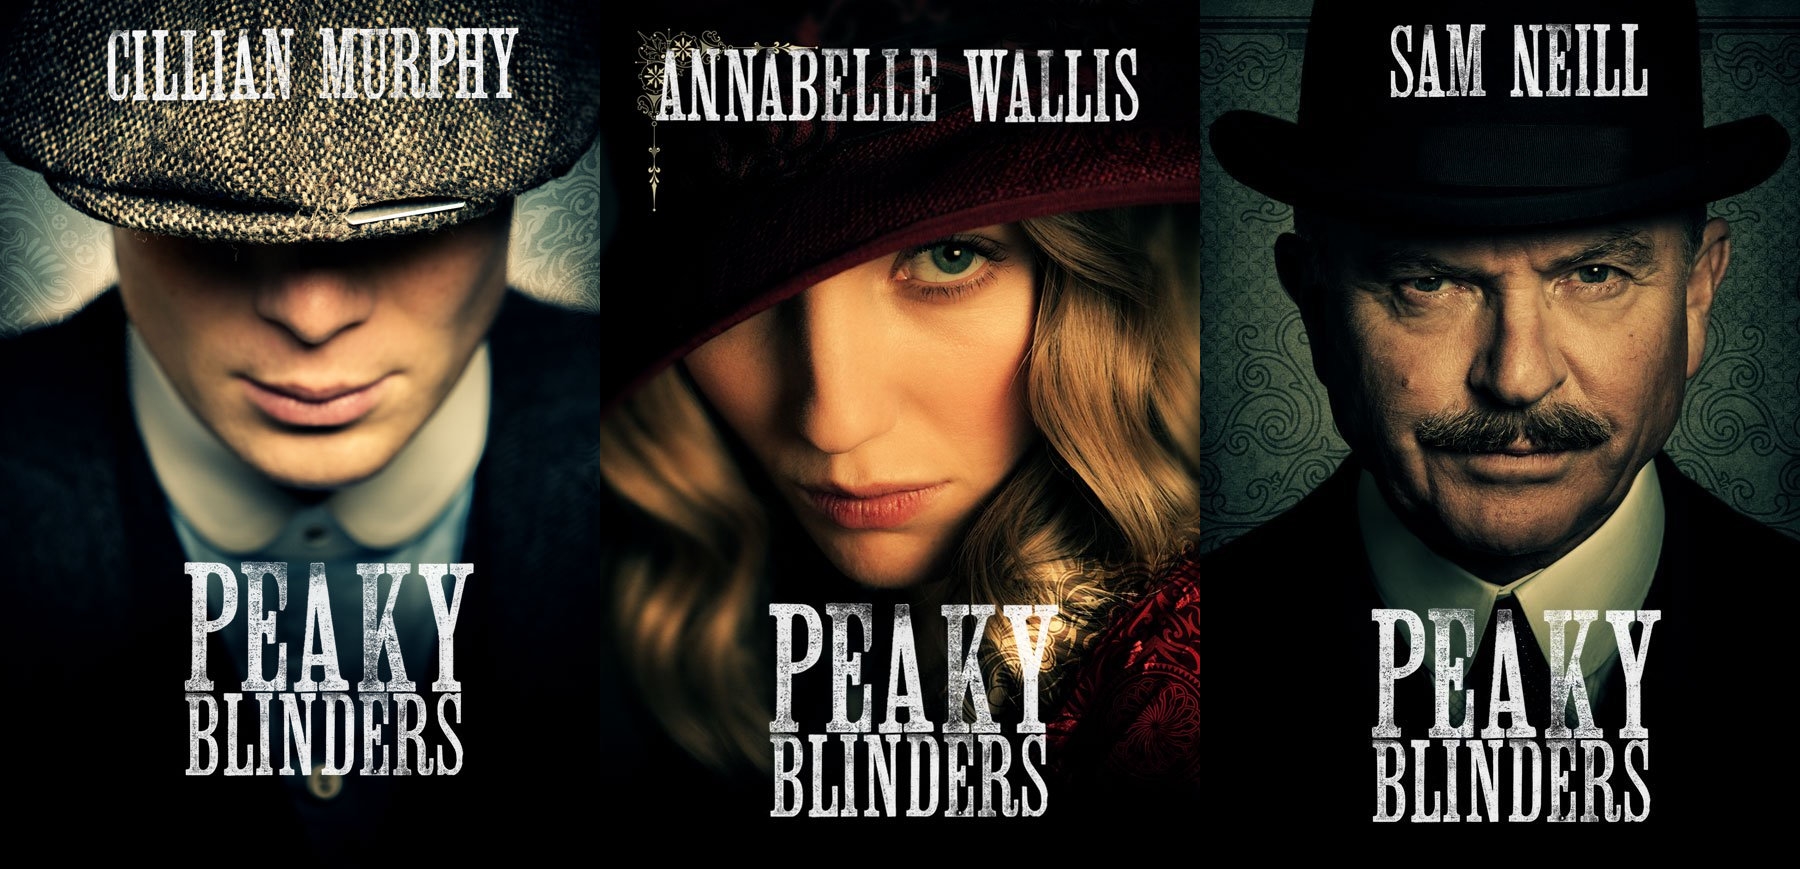 You are currently viewing Peaky Blinders